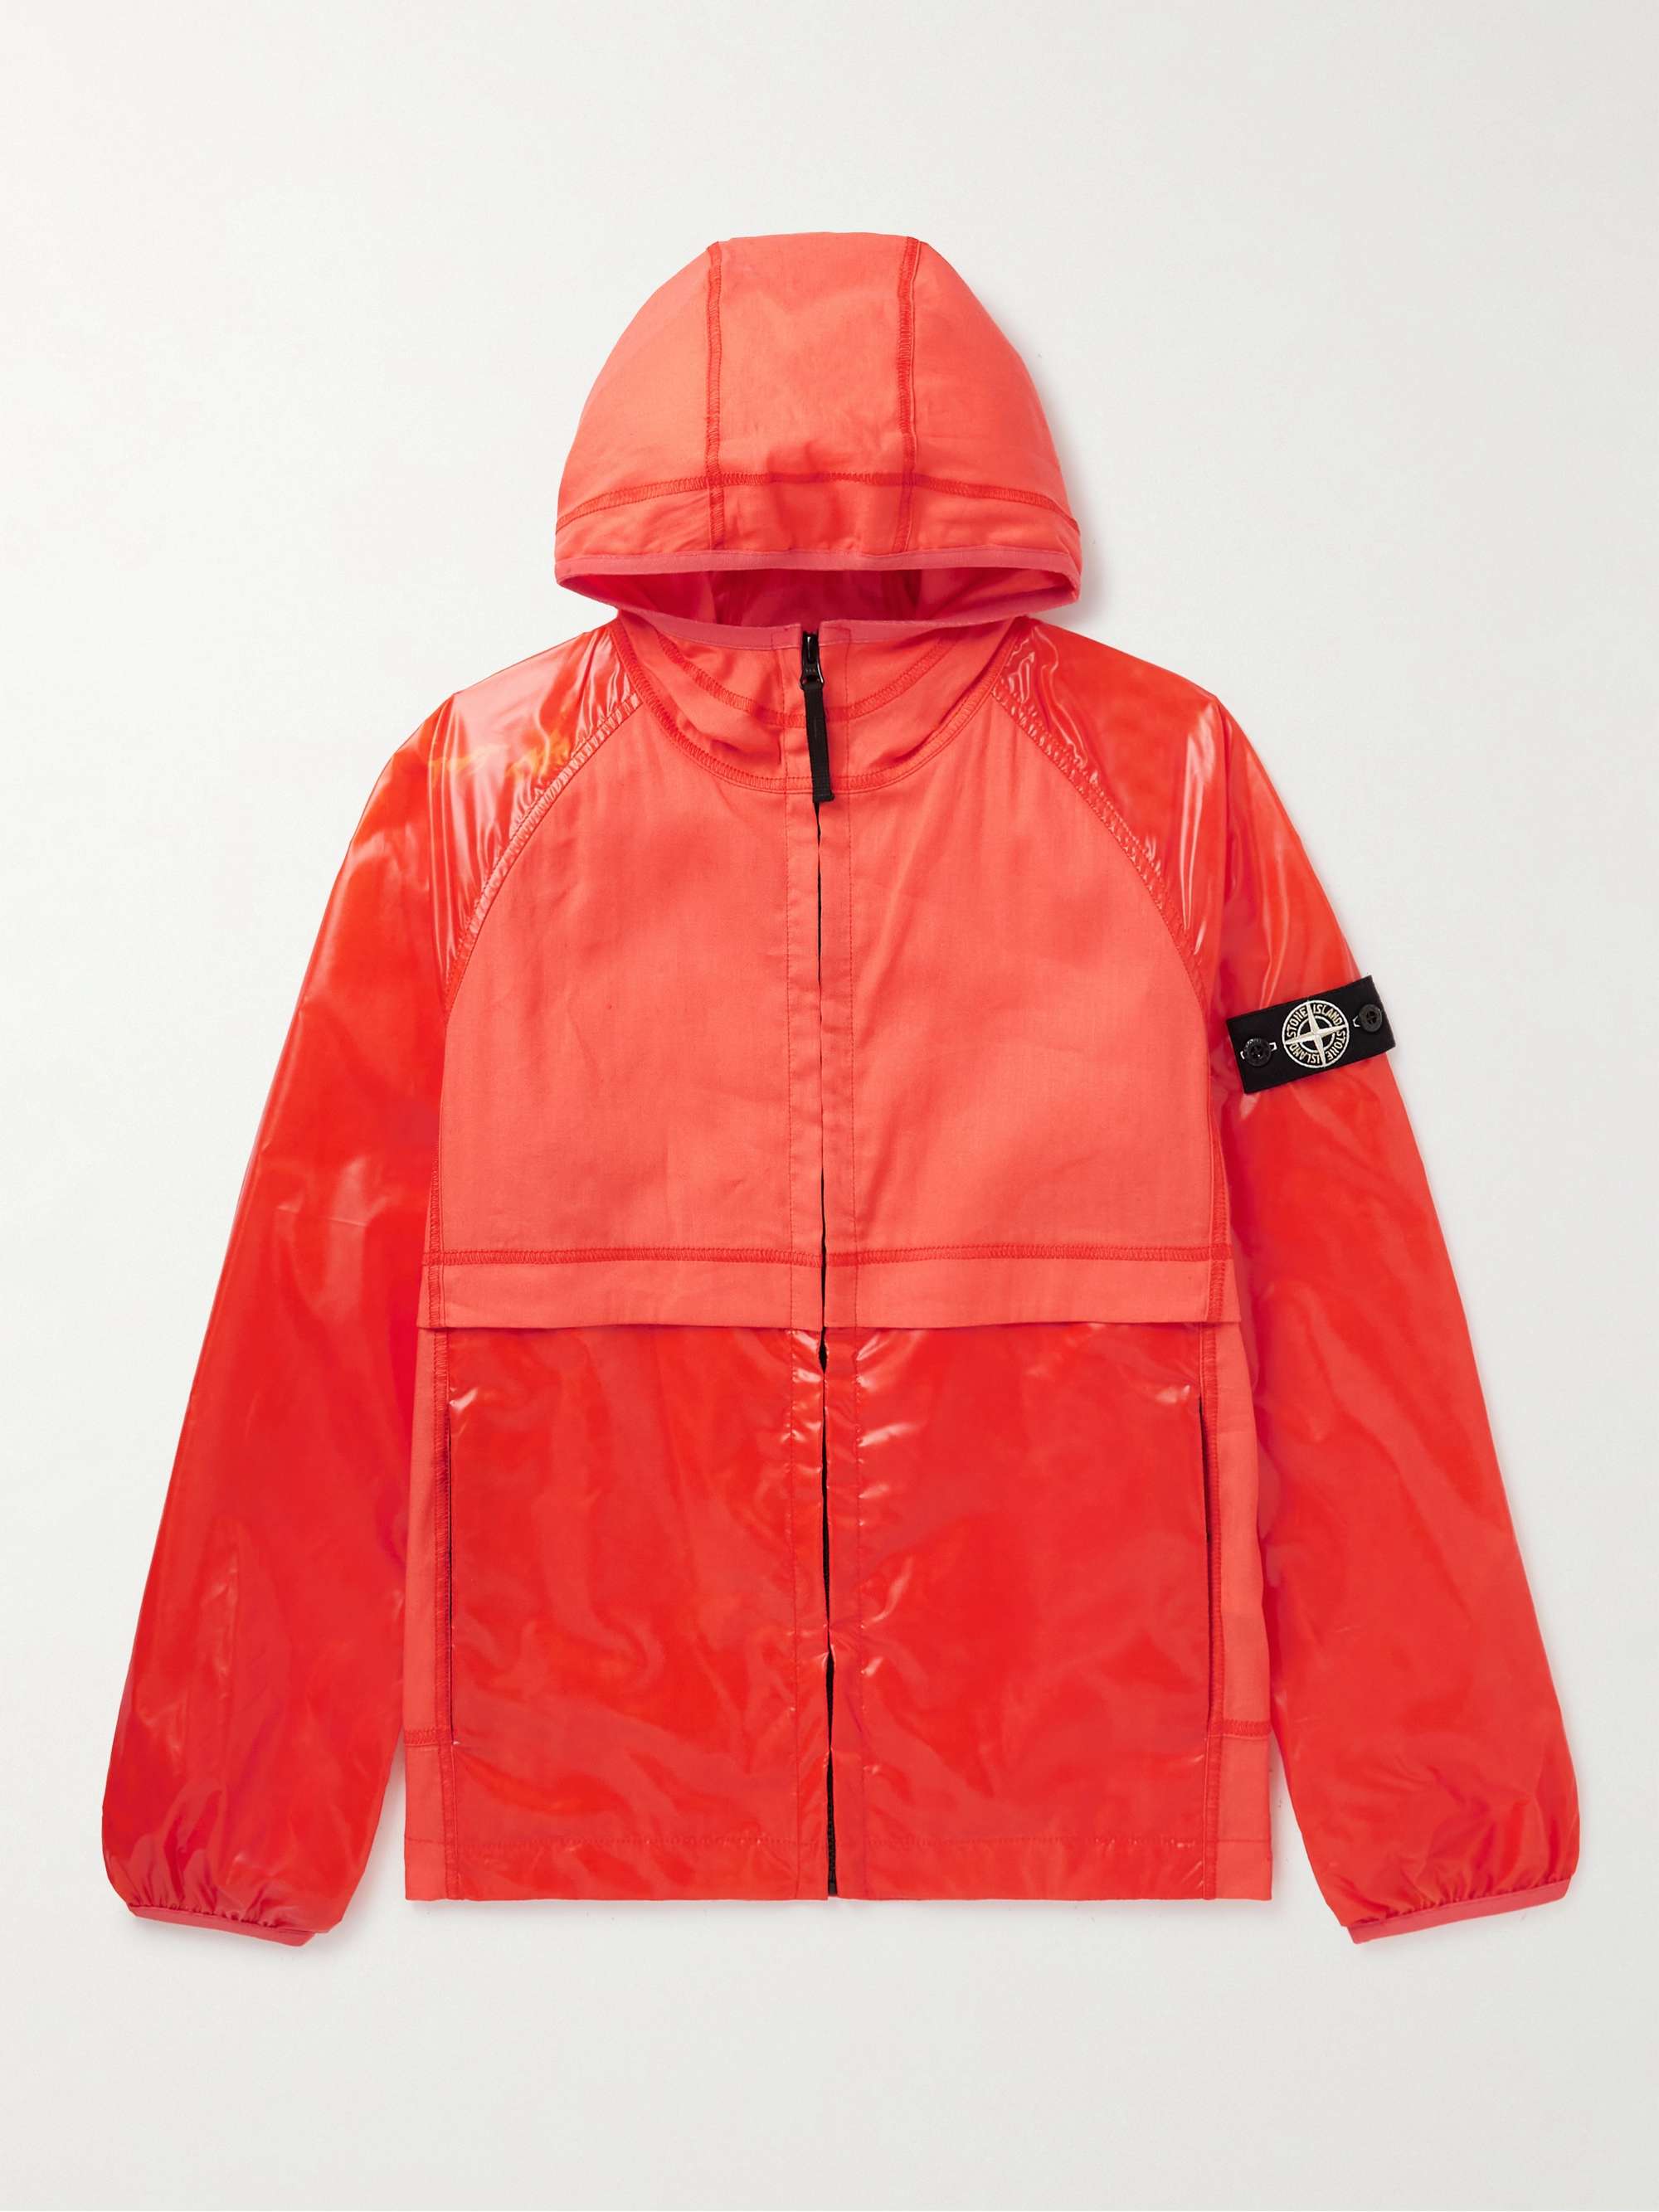 STONE ISLAND JUNIOR Ages 14-16 Logo-Appliquéd Shell and Canvas Hooded Jacket  | MR PORTER